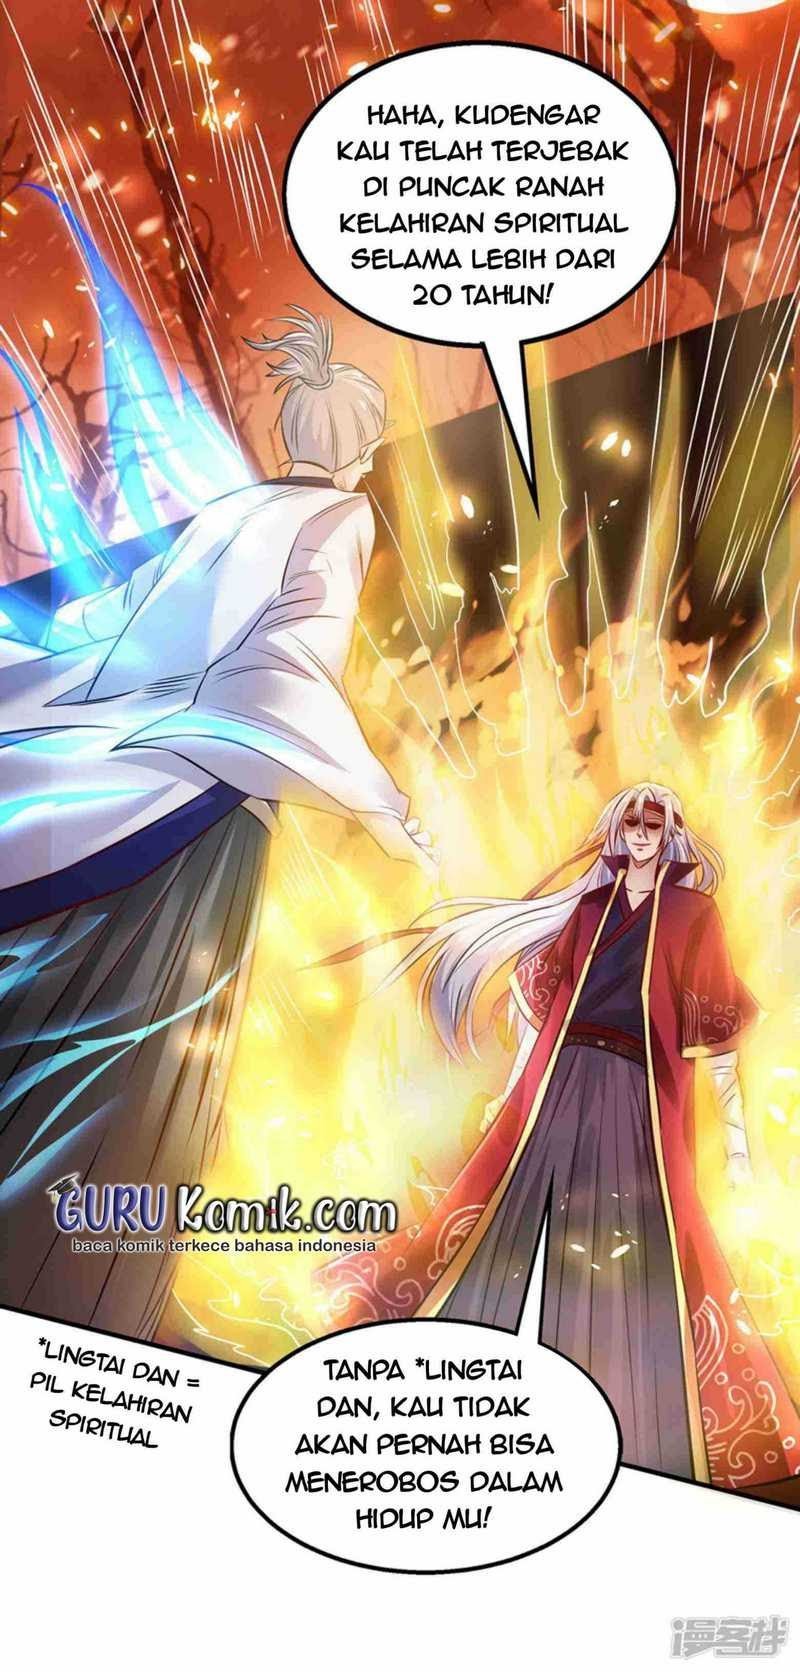 Against The Heaven Supreme (Heaven Guards) Chapter 3 - 163